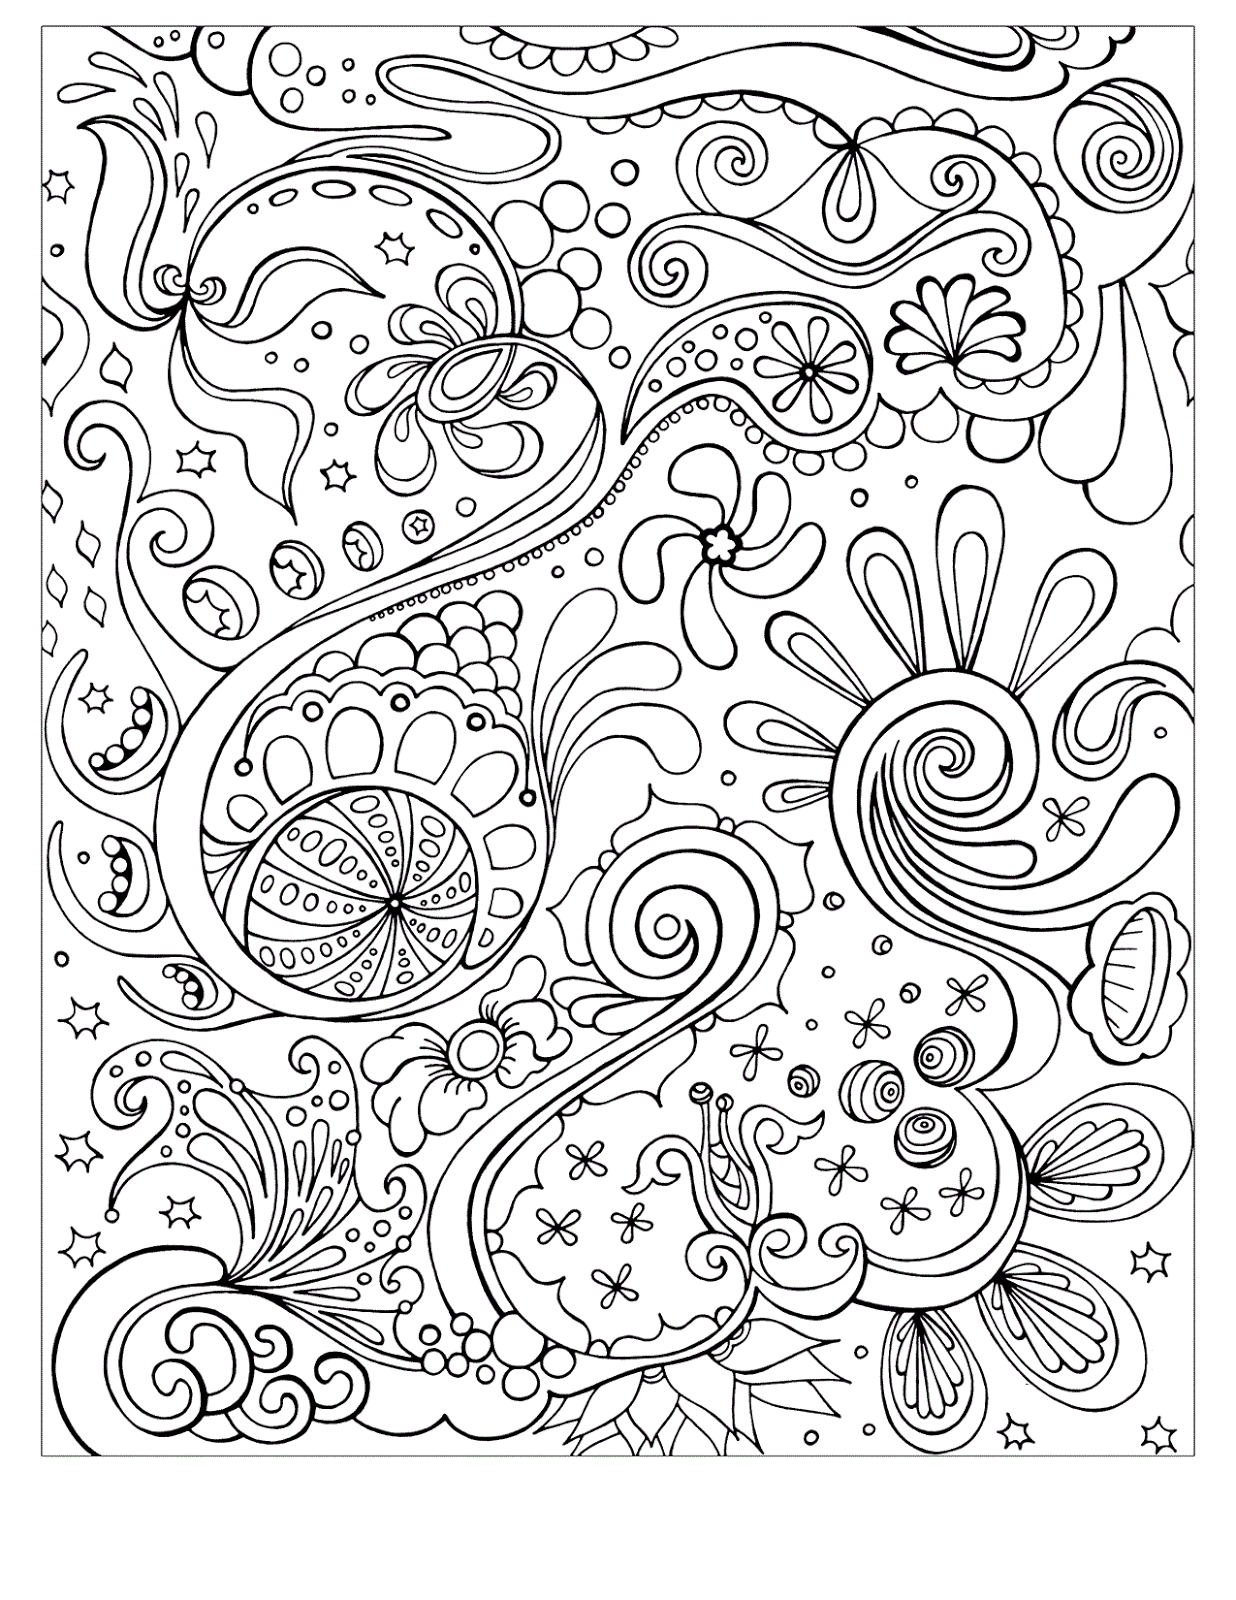 Coloring Pages: Complex Coloring Pages